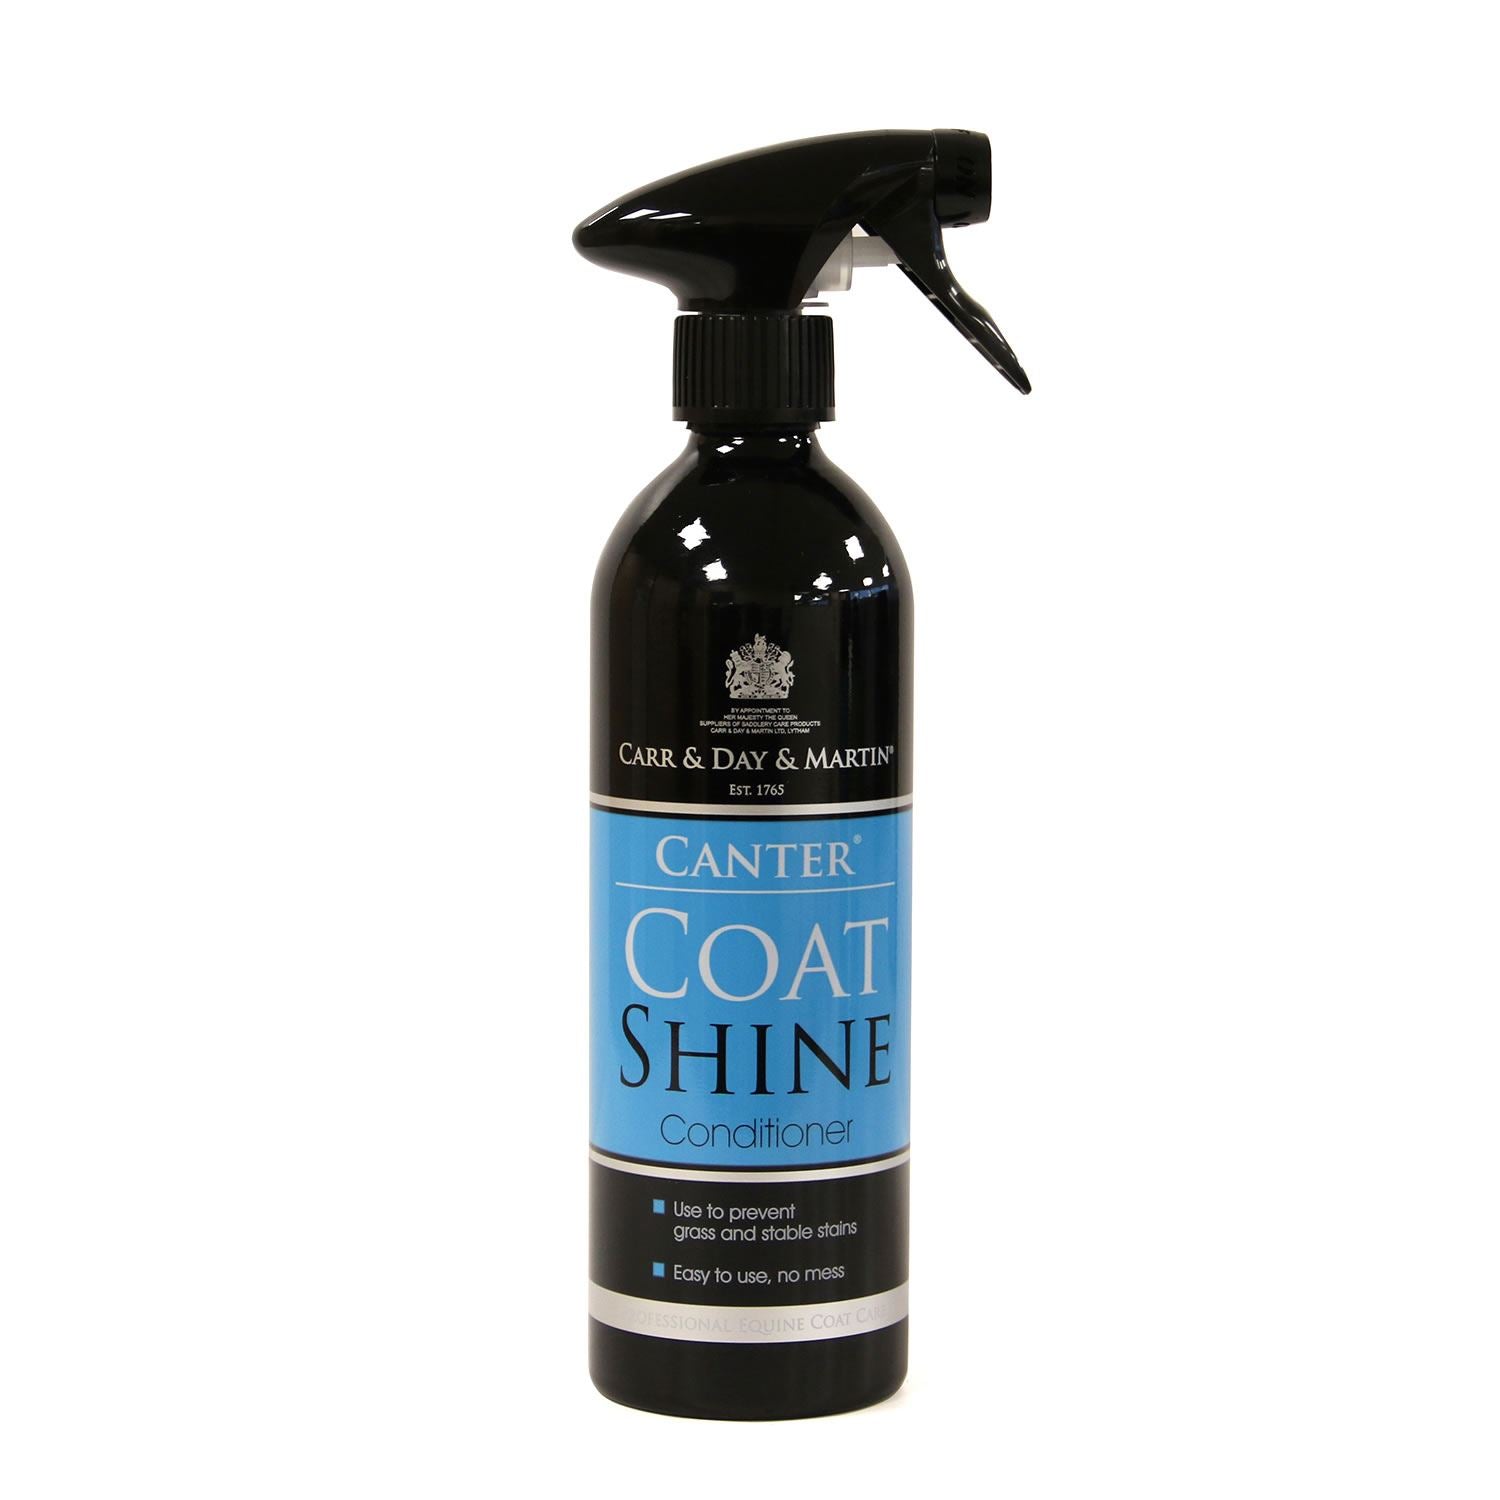 Carr & Day & Martin Canter Coat Shine Conditioner Spray - Just Horse Riders